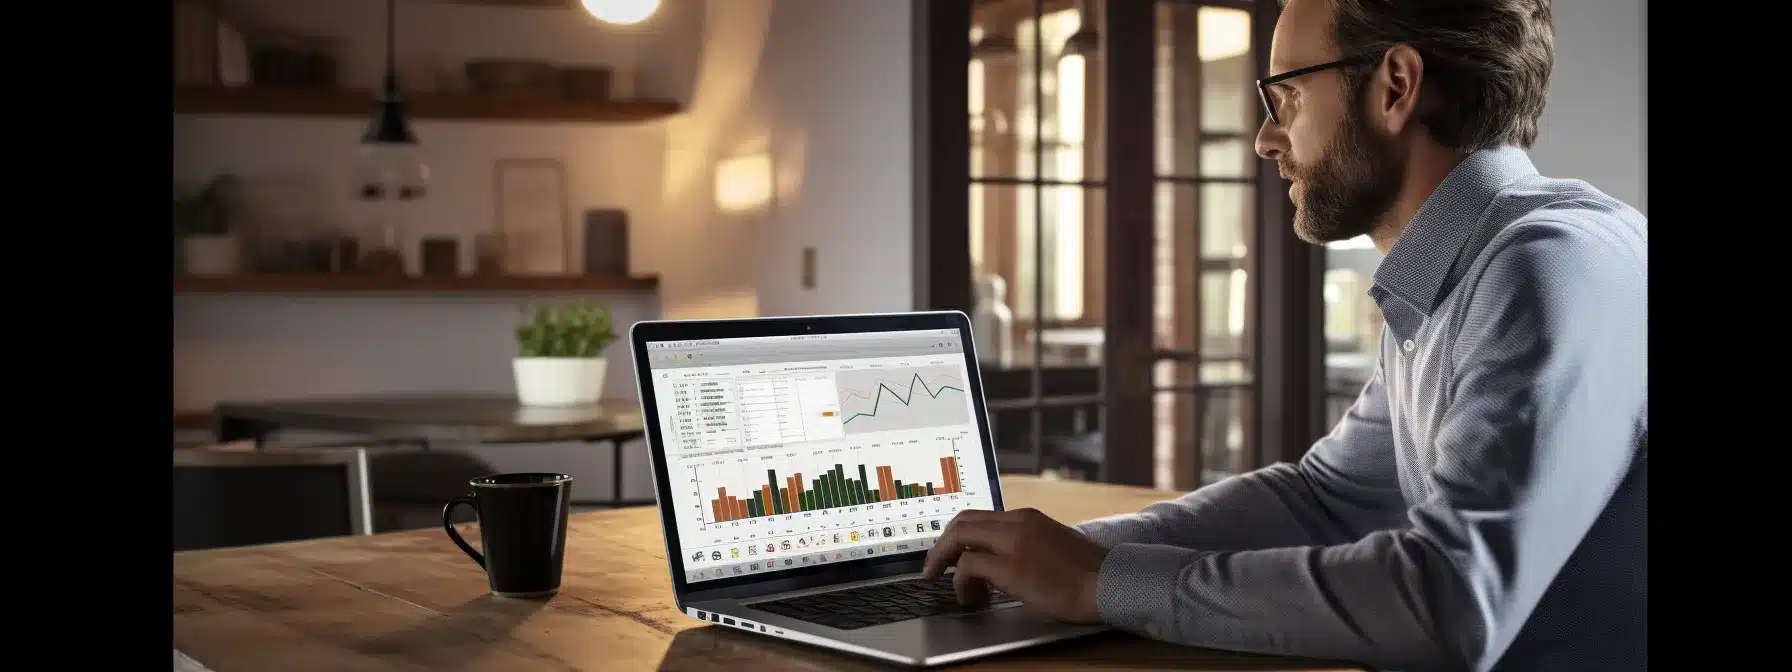 Business Owner Looking At Case Studies Of Successful Brands On A Laptop, Surrounded By Charts And Graphs.